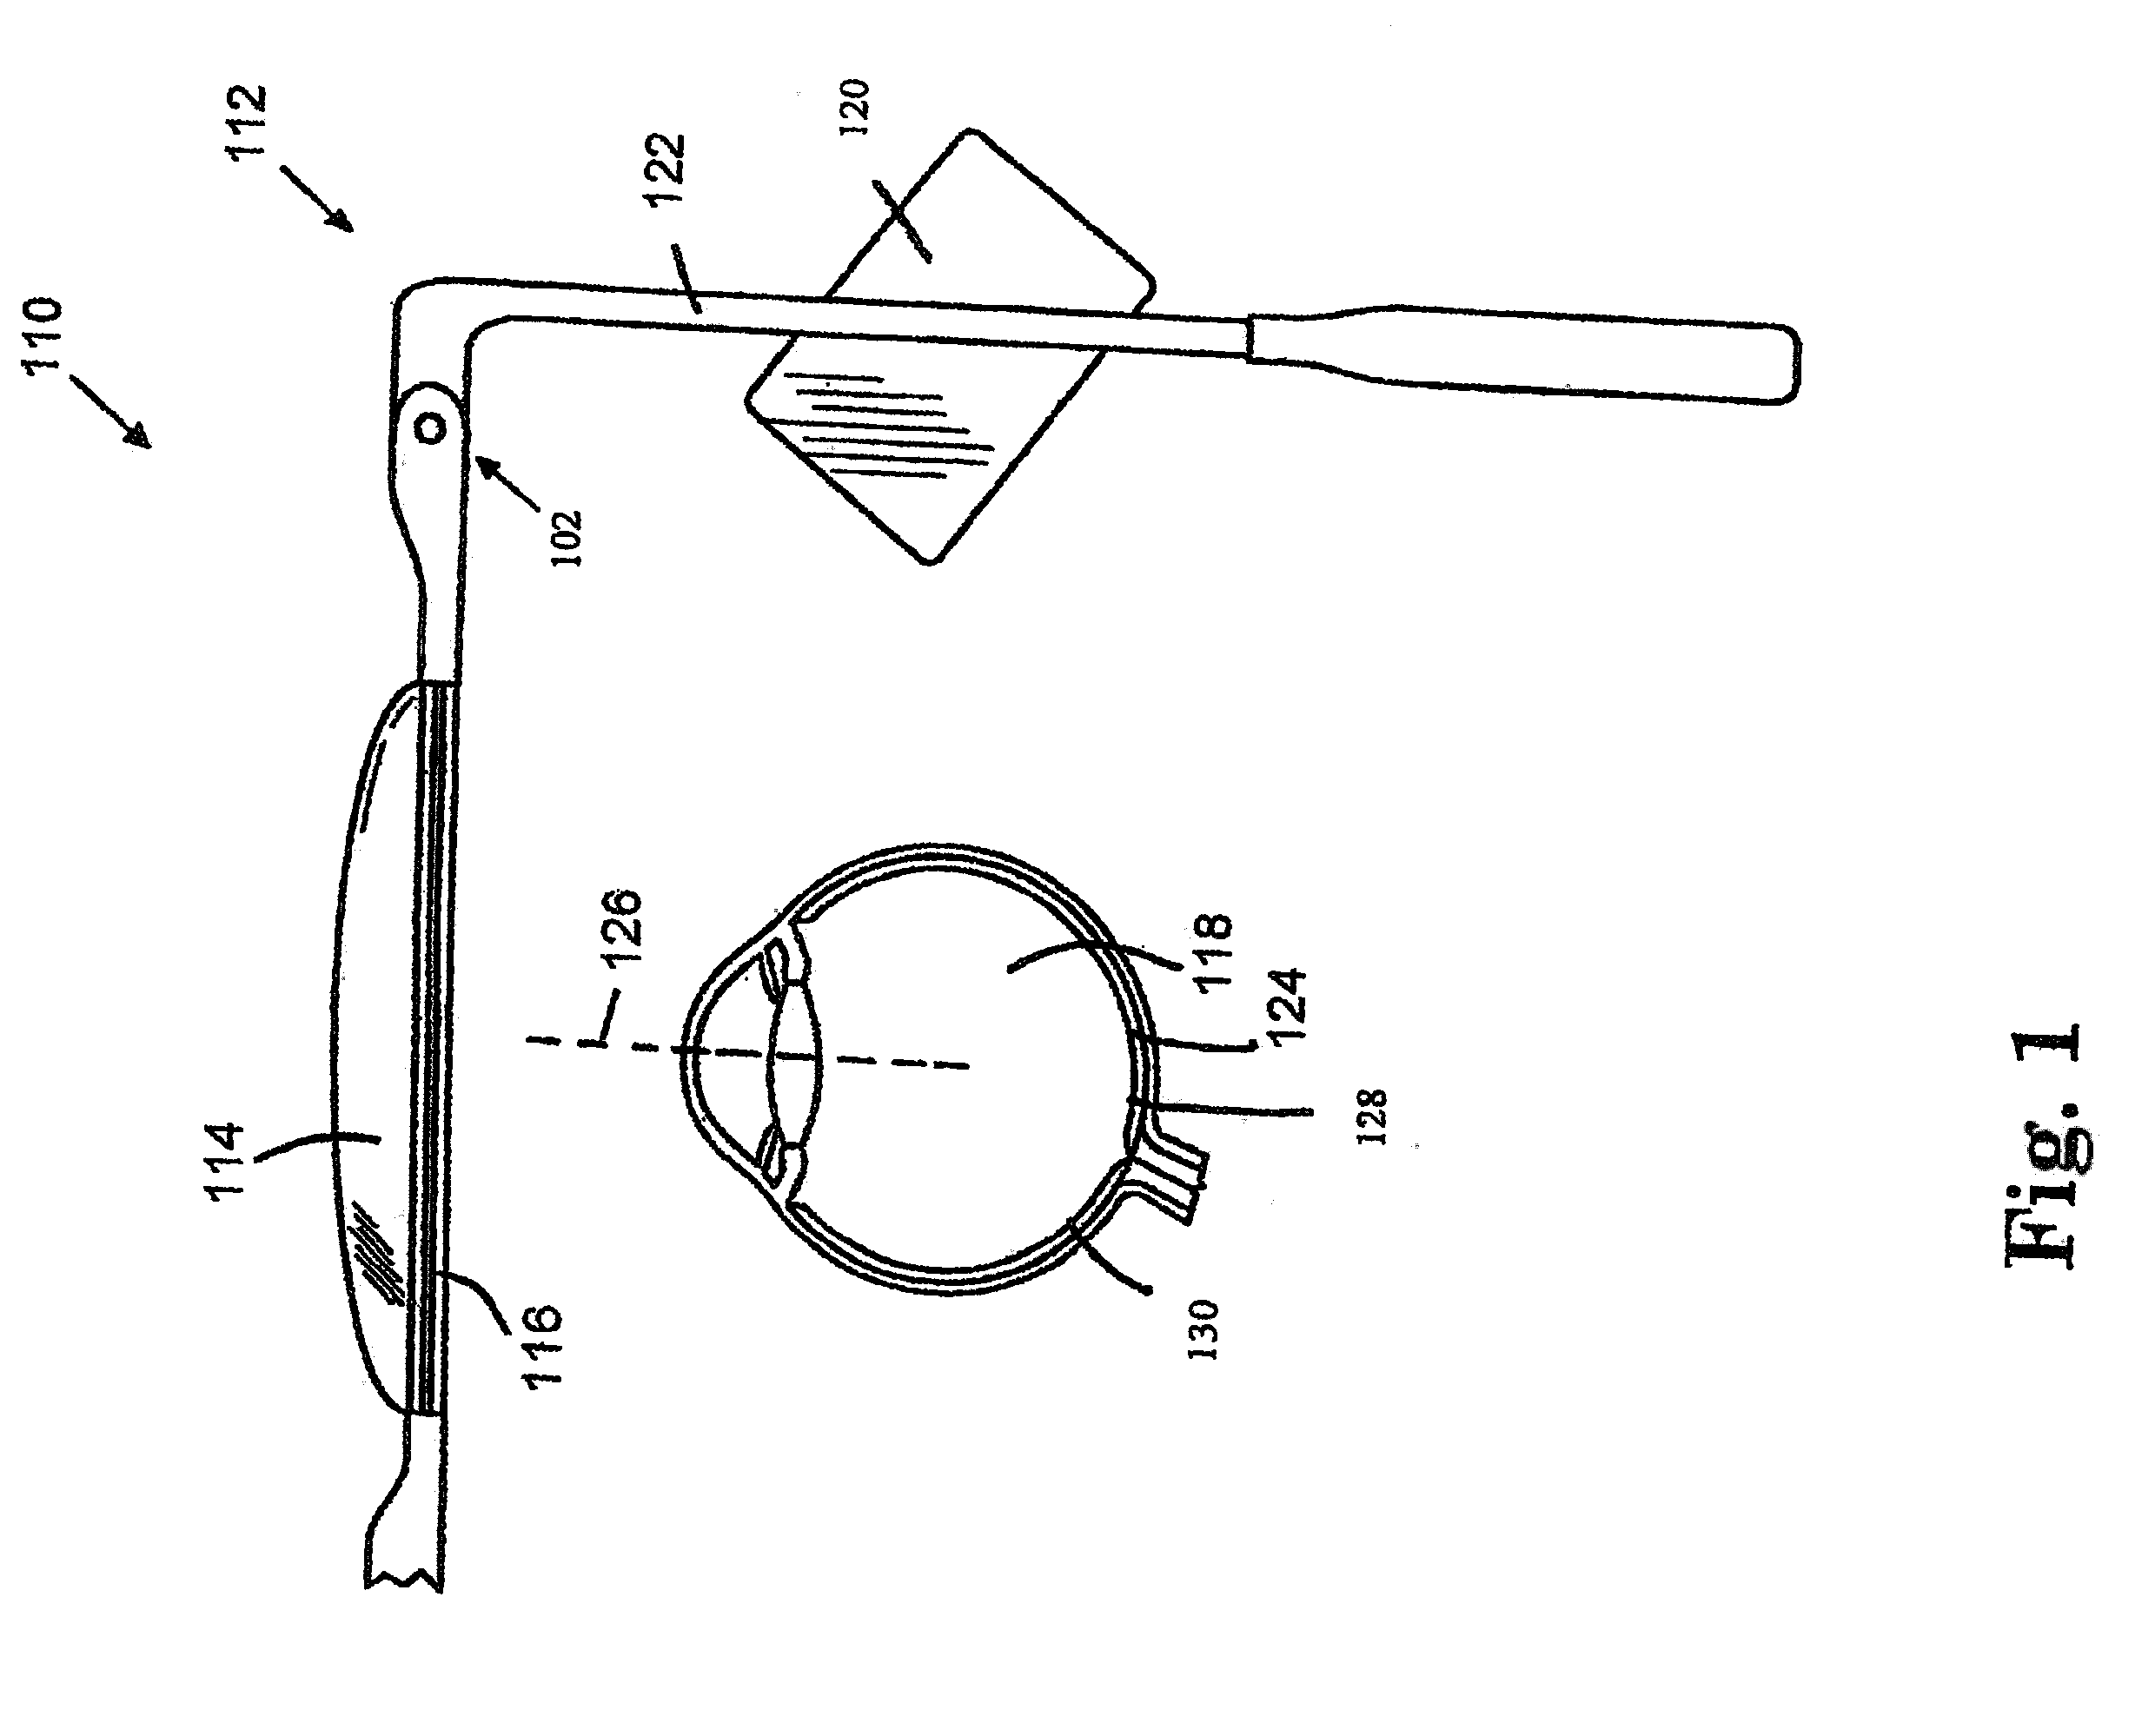 Near to Eye Display System and Appliance